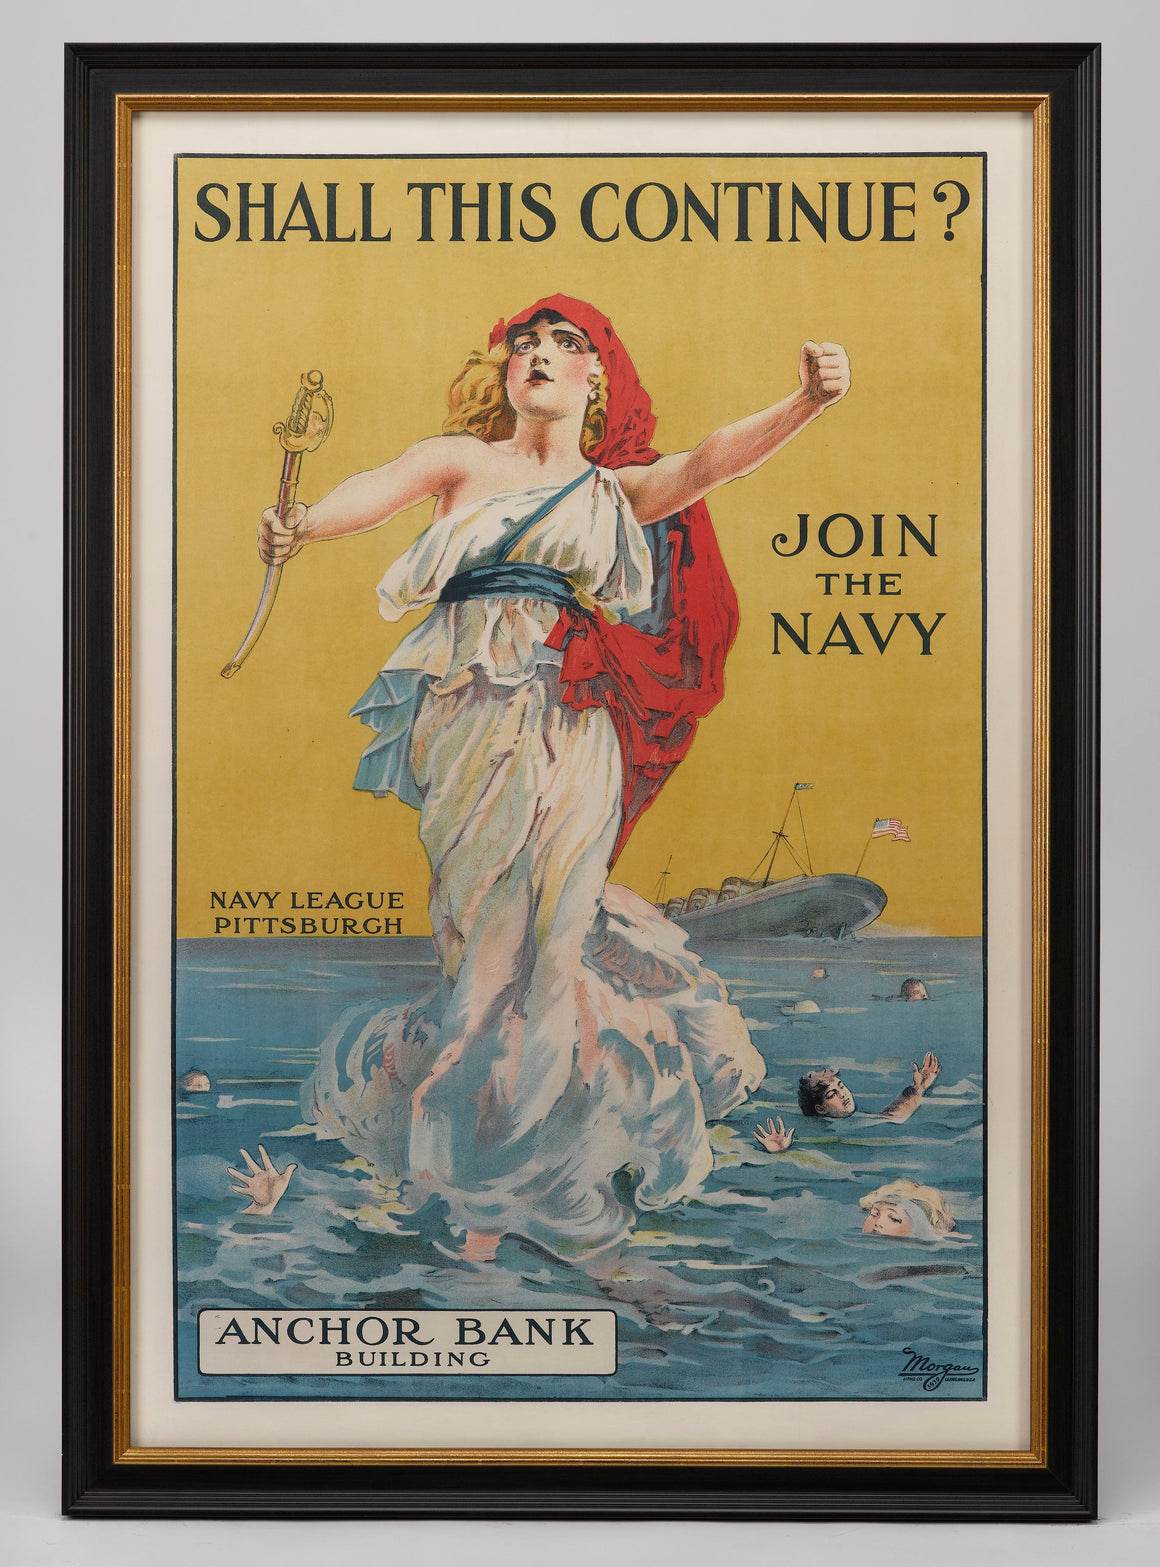 "Shall This Continue? Join the Navy" Vintage Navy Recruitment Poster, circa 1916